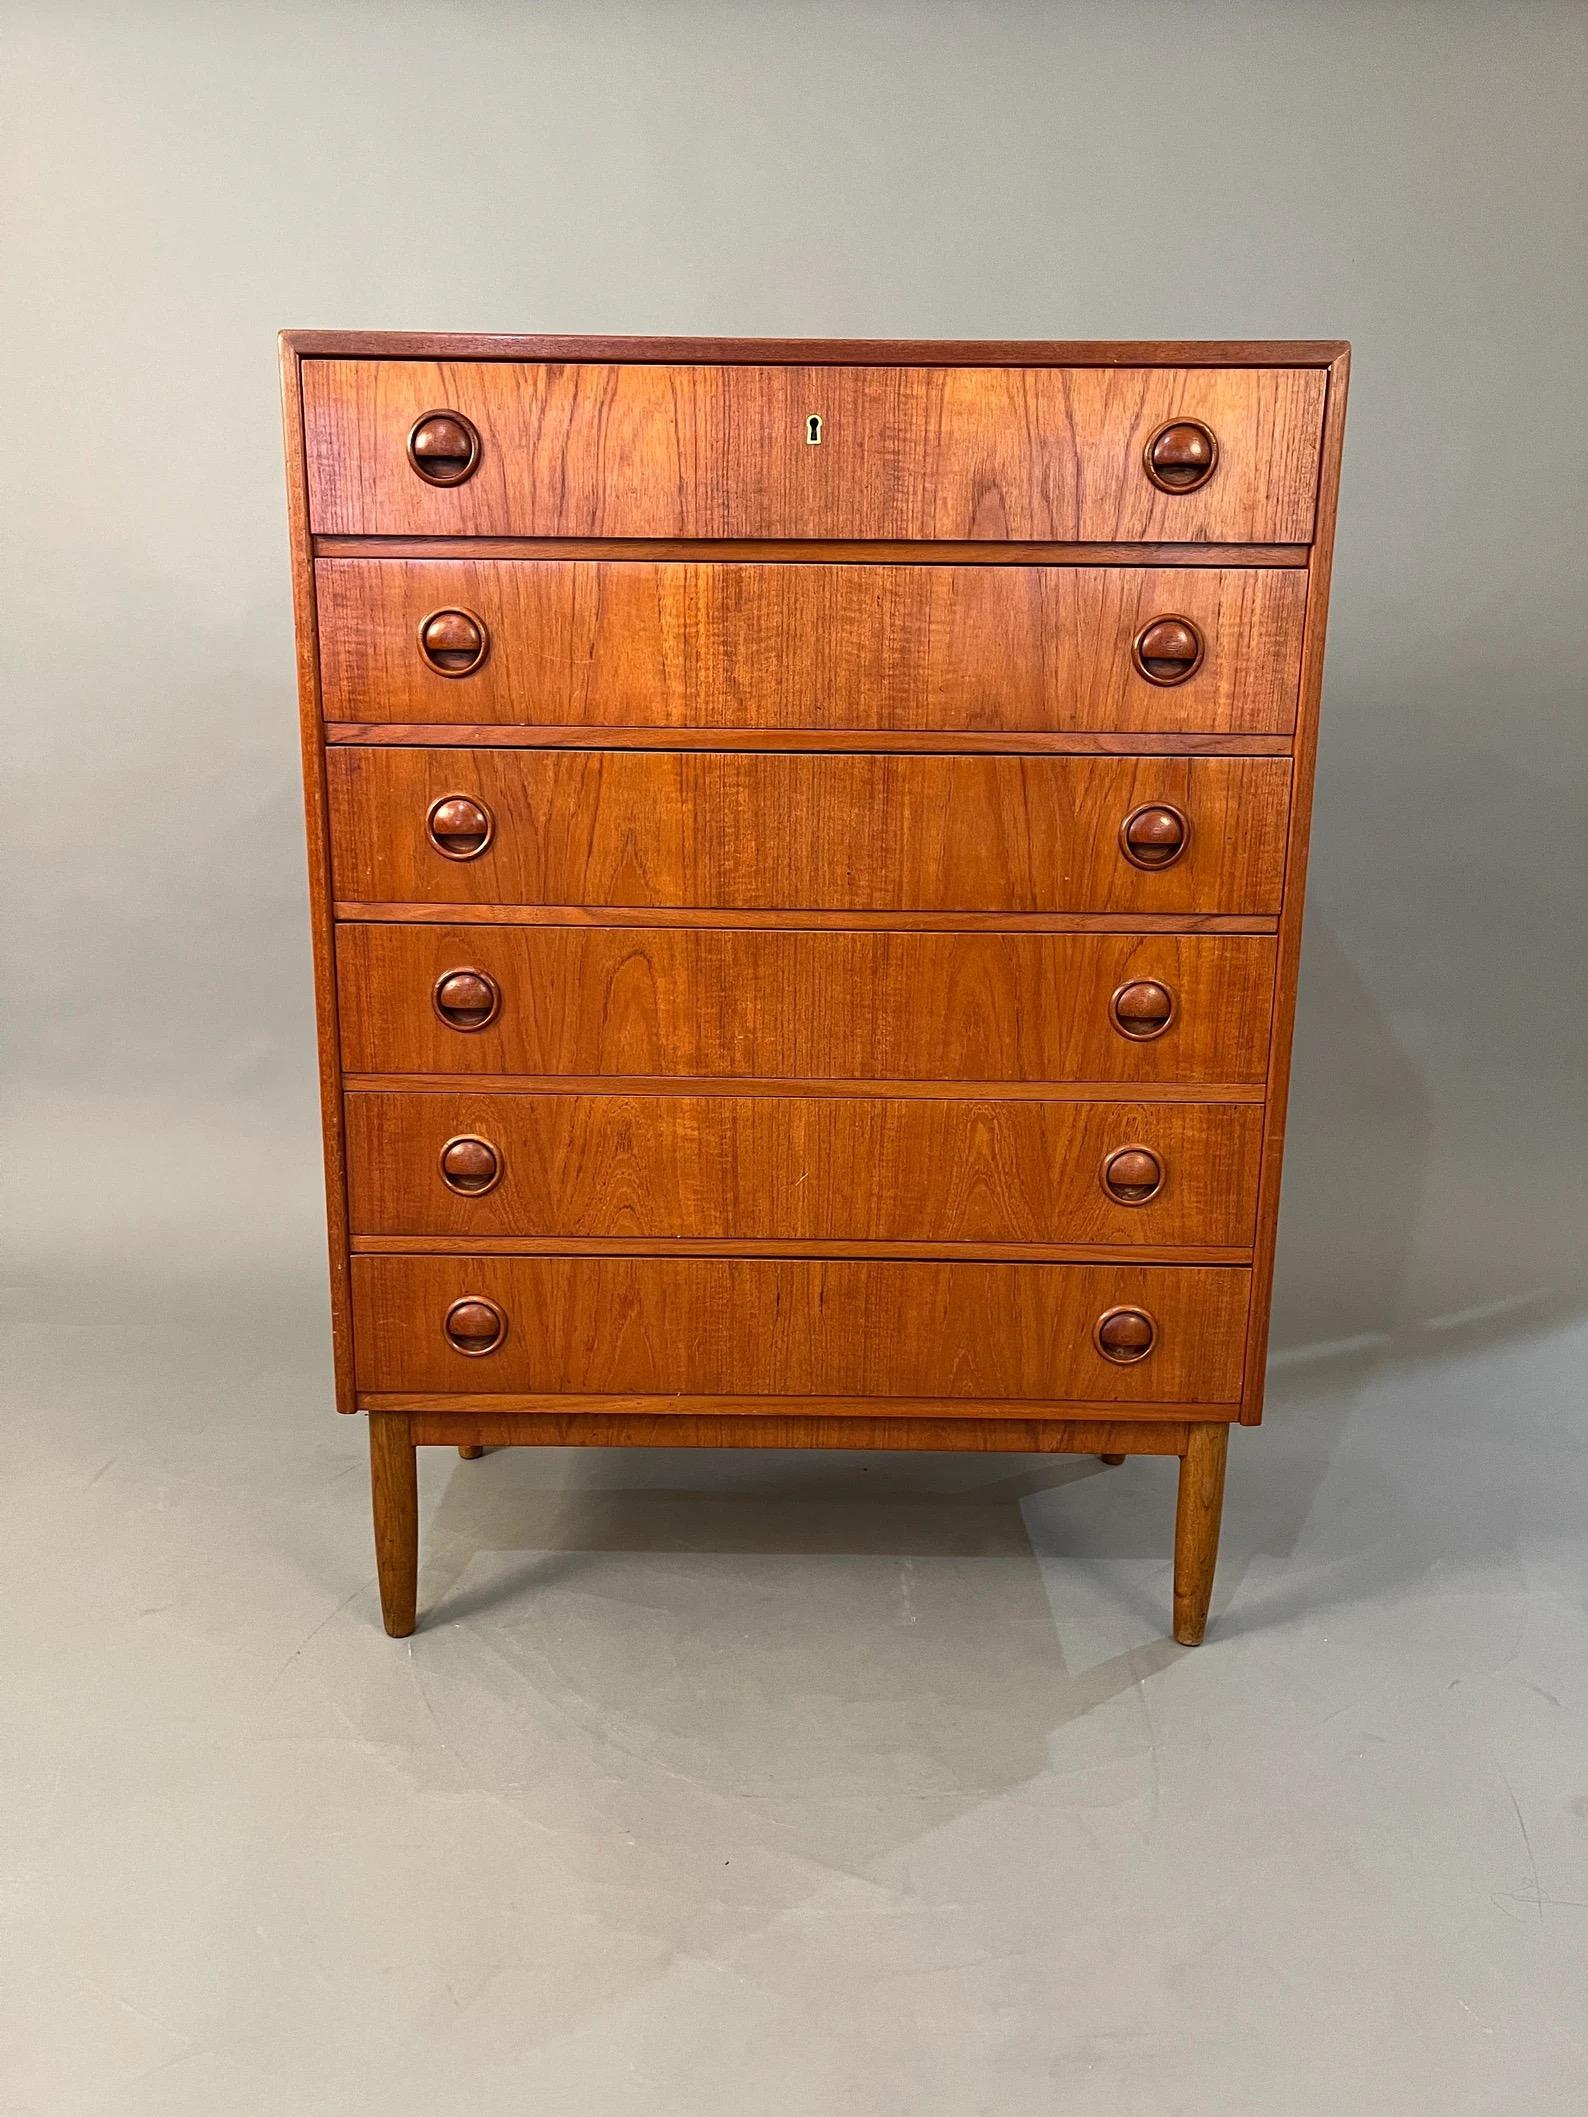 Enhance your living space with this stunning mid-century highboy teak dresser from Denmark. Crafted in the 1960s, this dresser features six spacious drawers, providing ample storage for your belongings. The teak wood exudes a warm and timeless